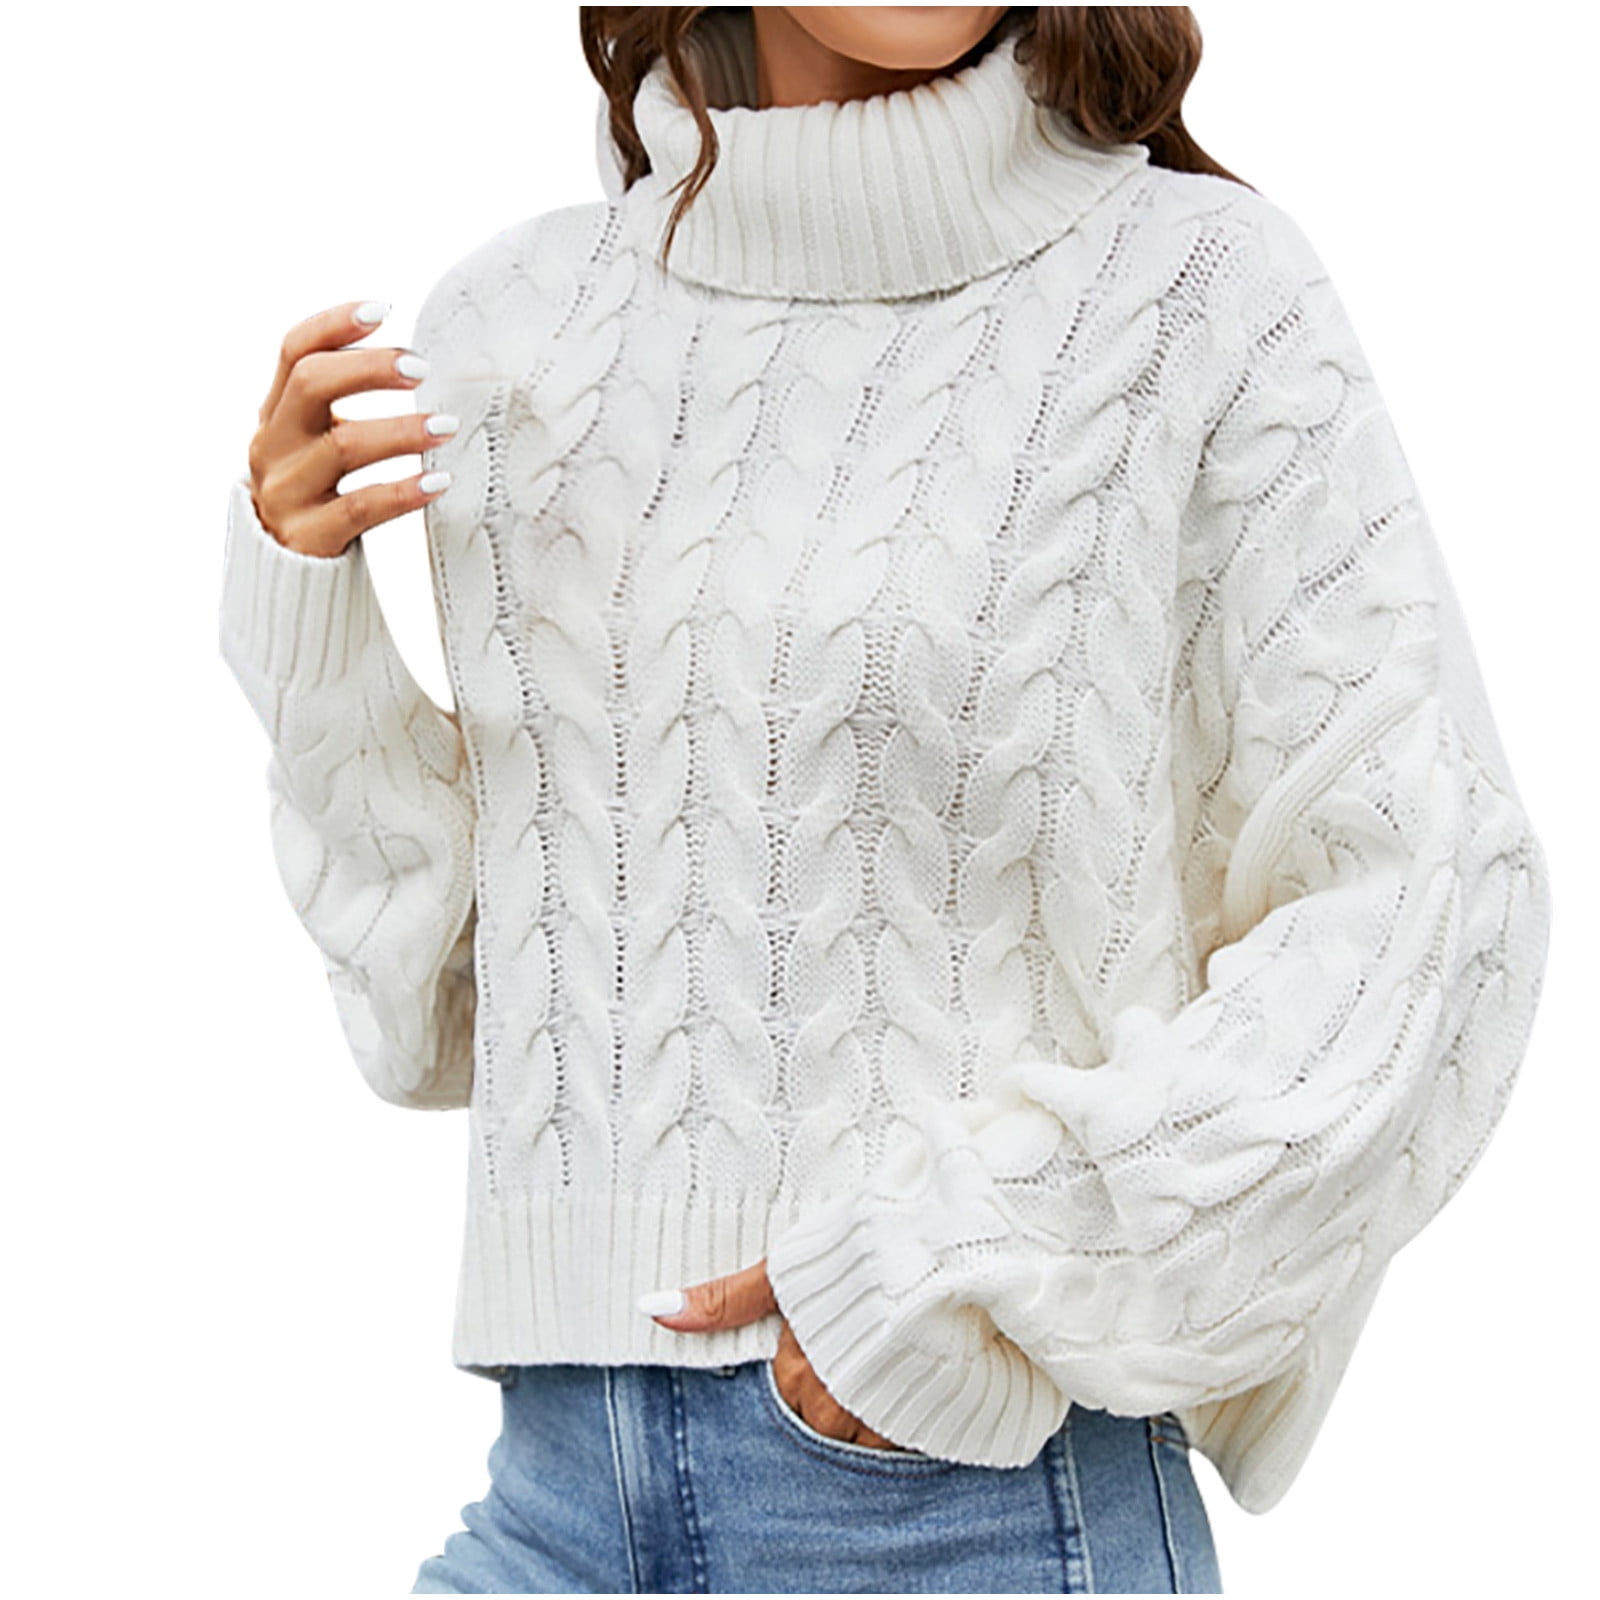 HTNBO Long Sleeve Sweater for Women Crew Neck Knit Loose Pullover ...